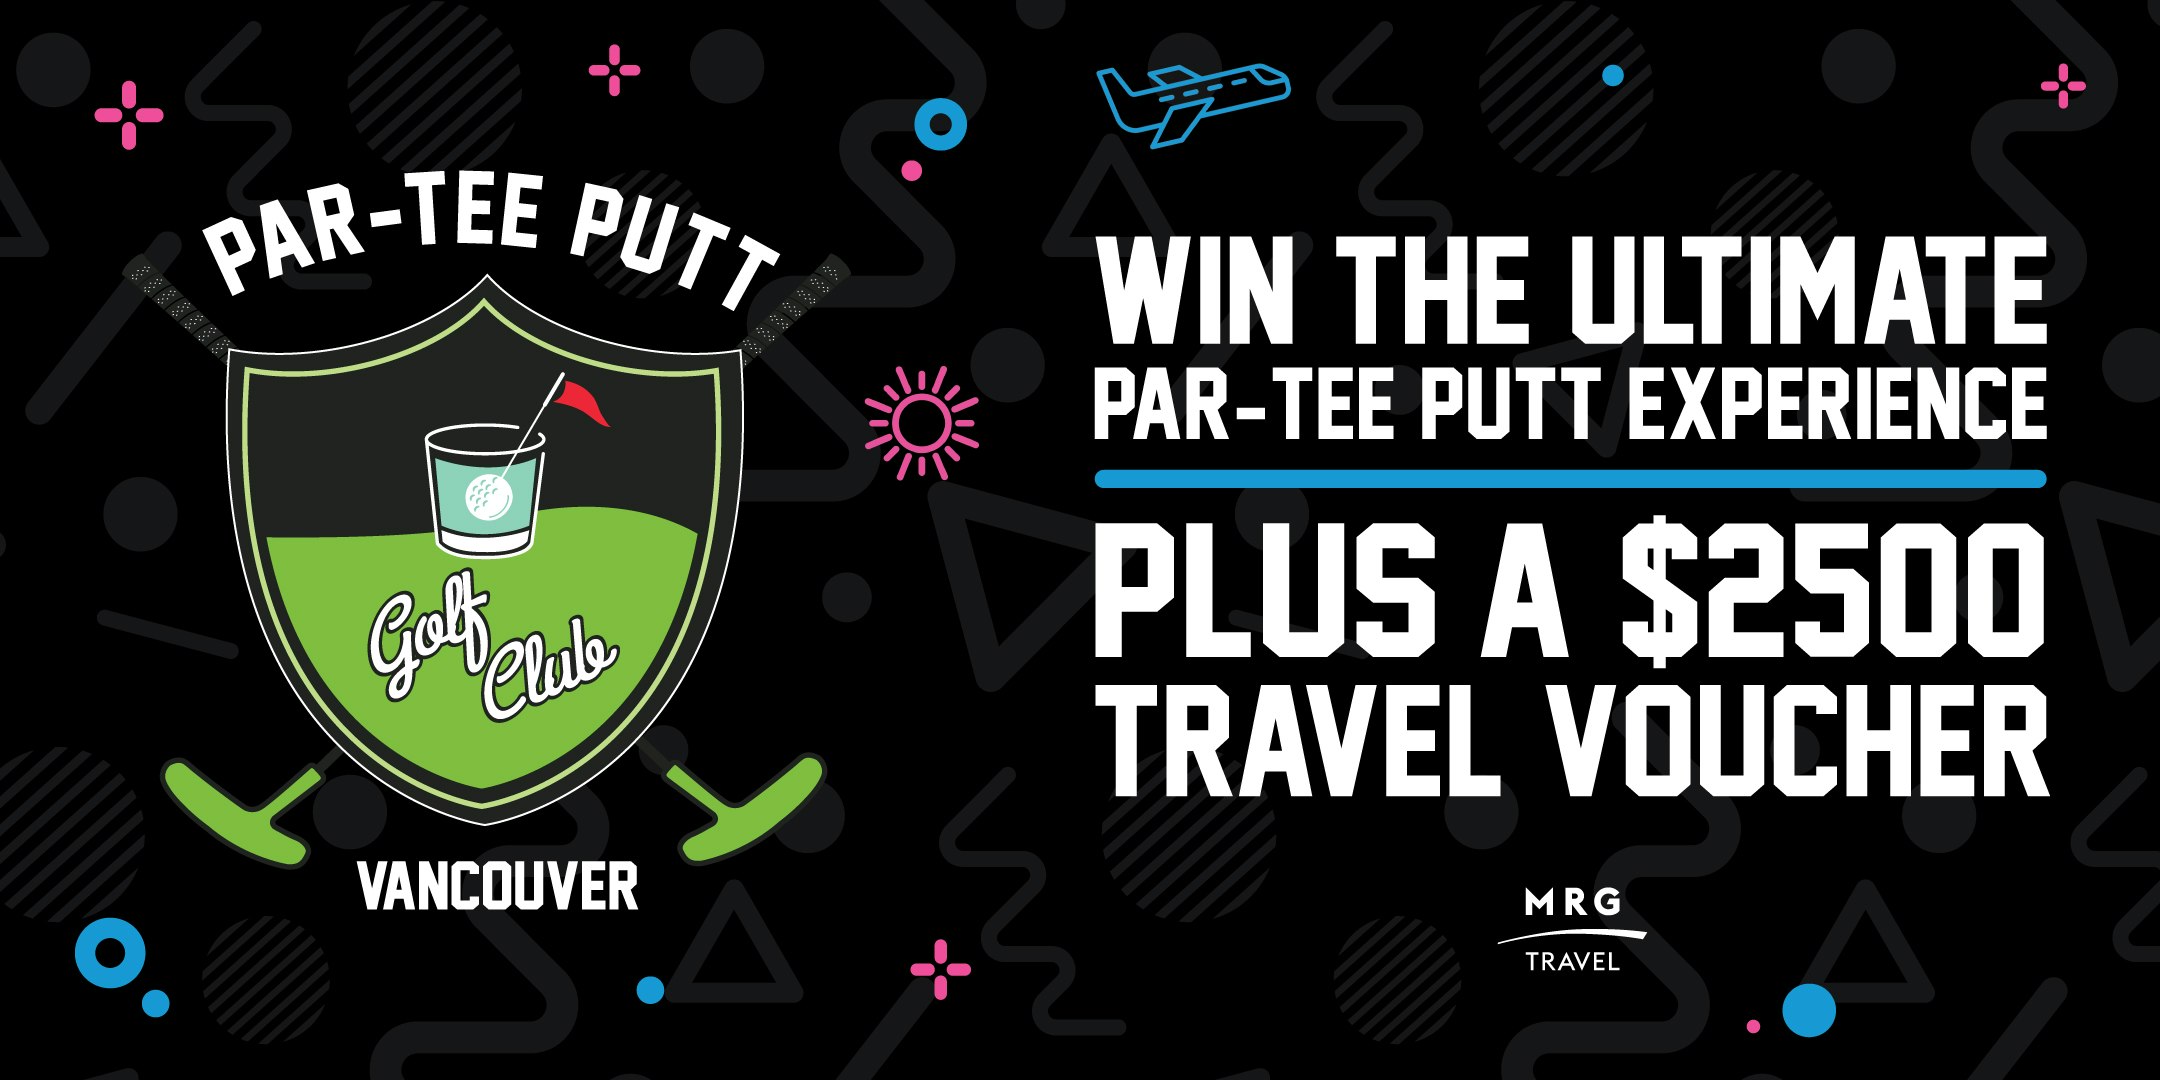 online contests, sweepstakes and giveaways - Vancouver! Win The Ultimate Par-Tee Putt Experience, Plus a $2500 Travel Voucher to MRG Travel!